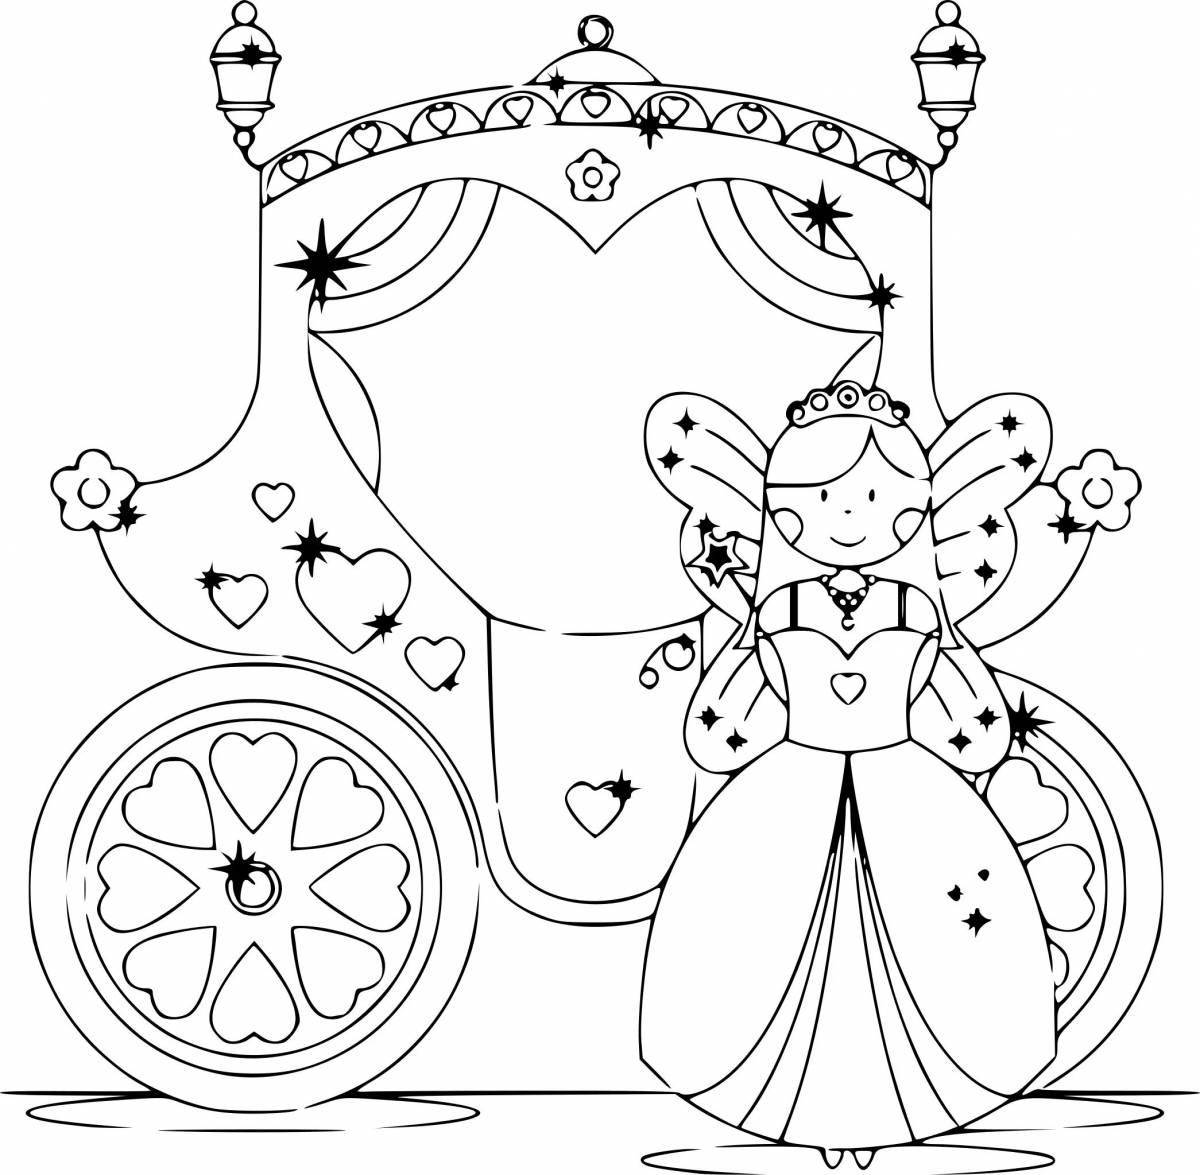 Coloring page charming princess in a carriage